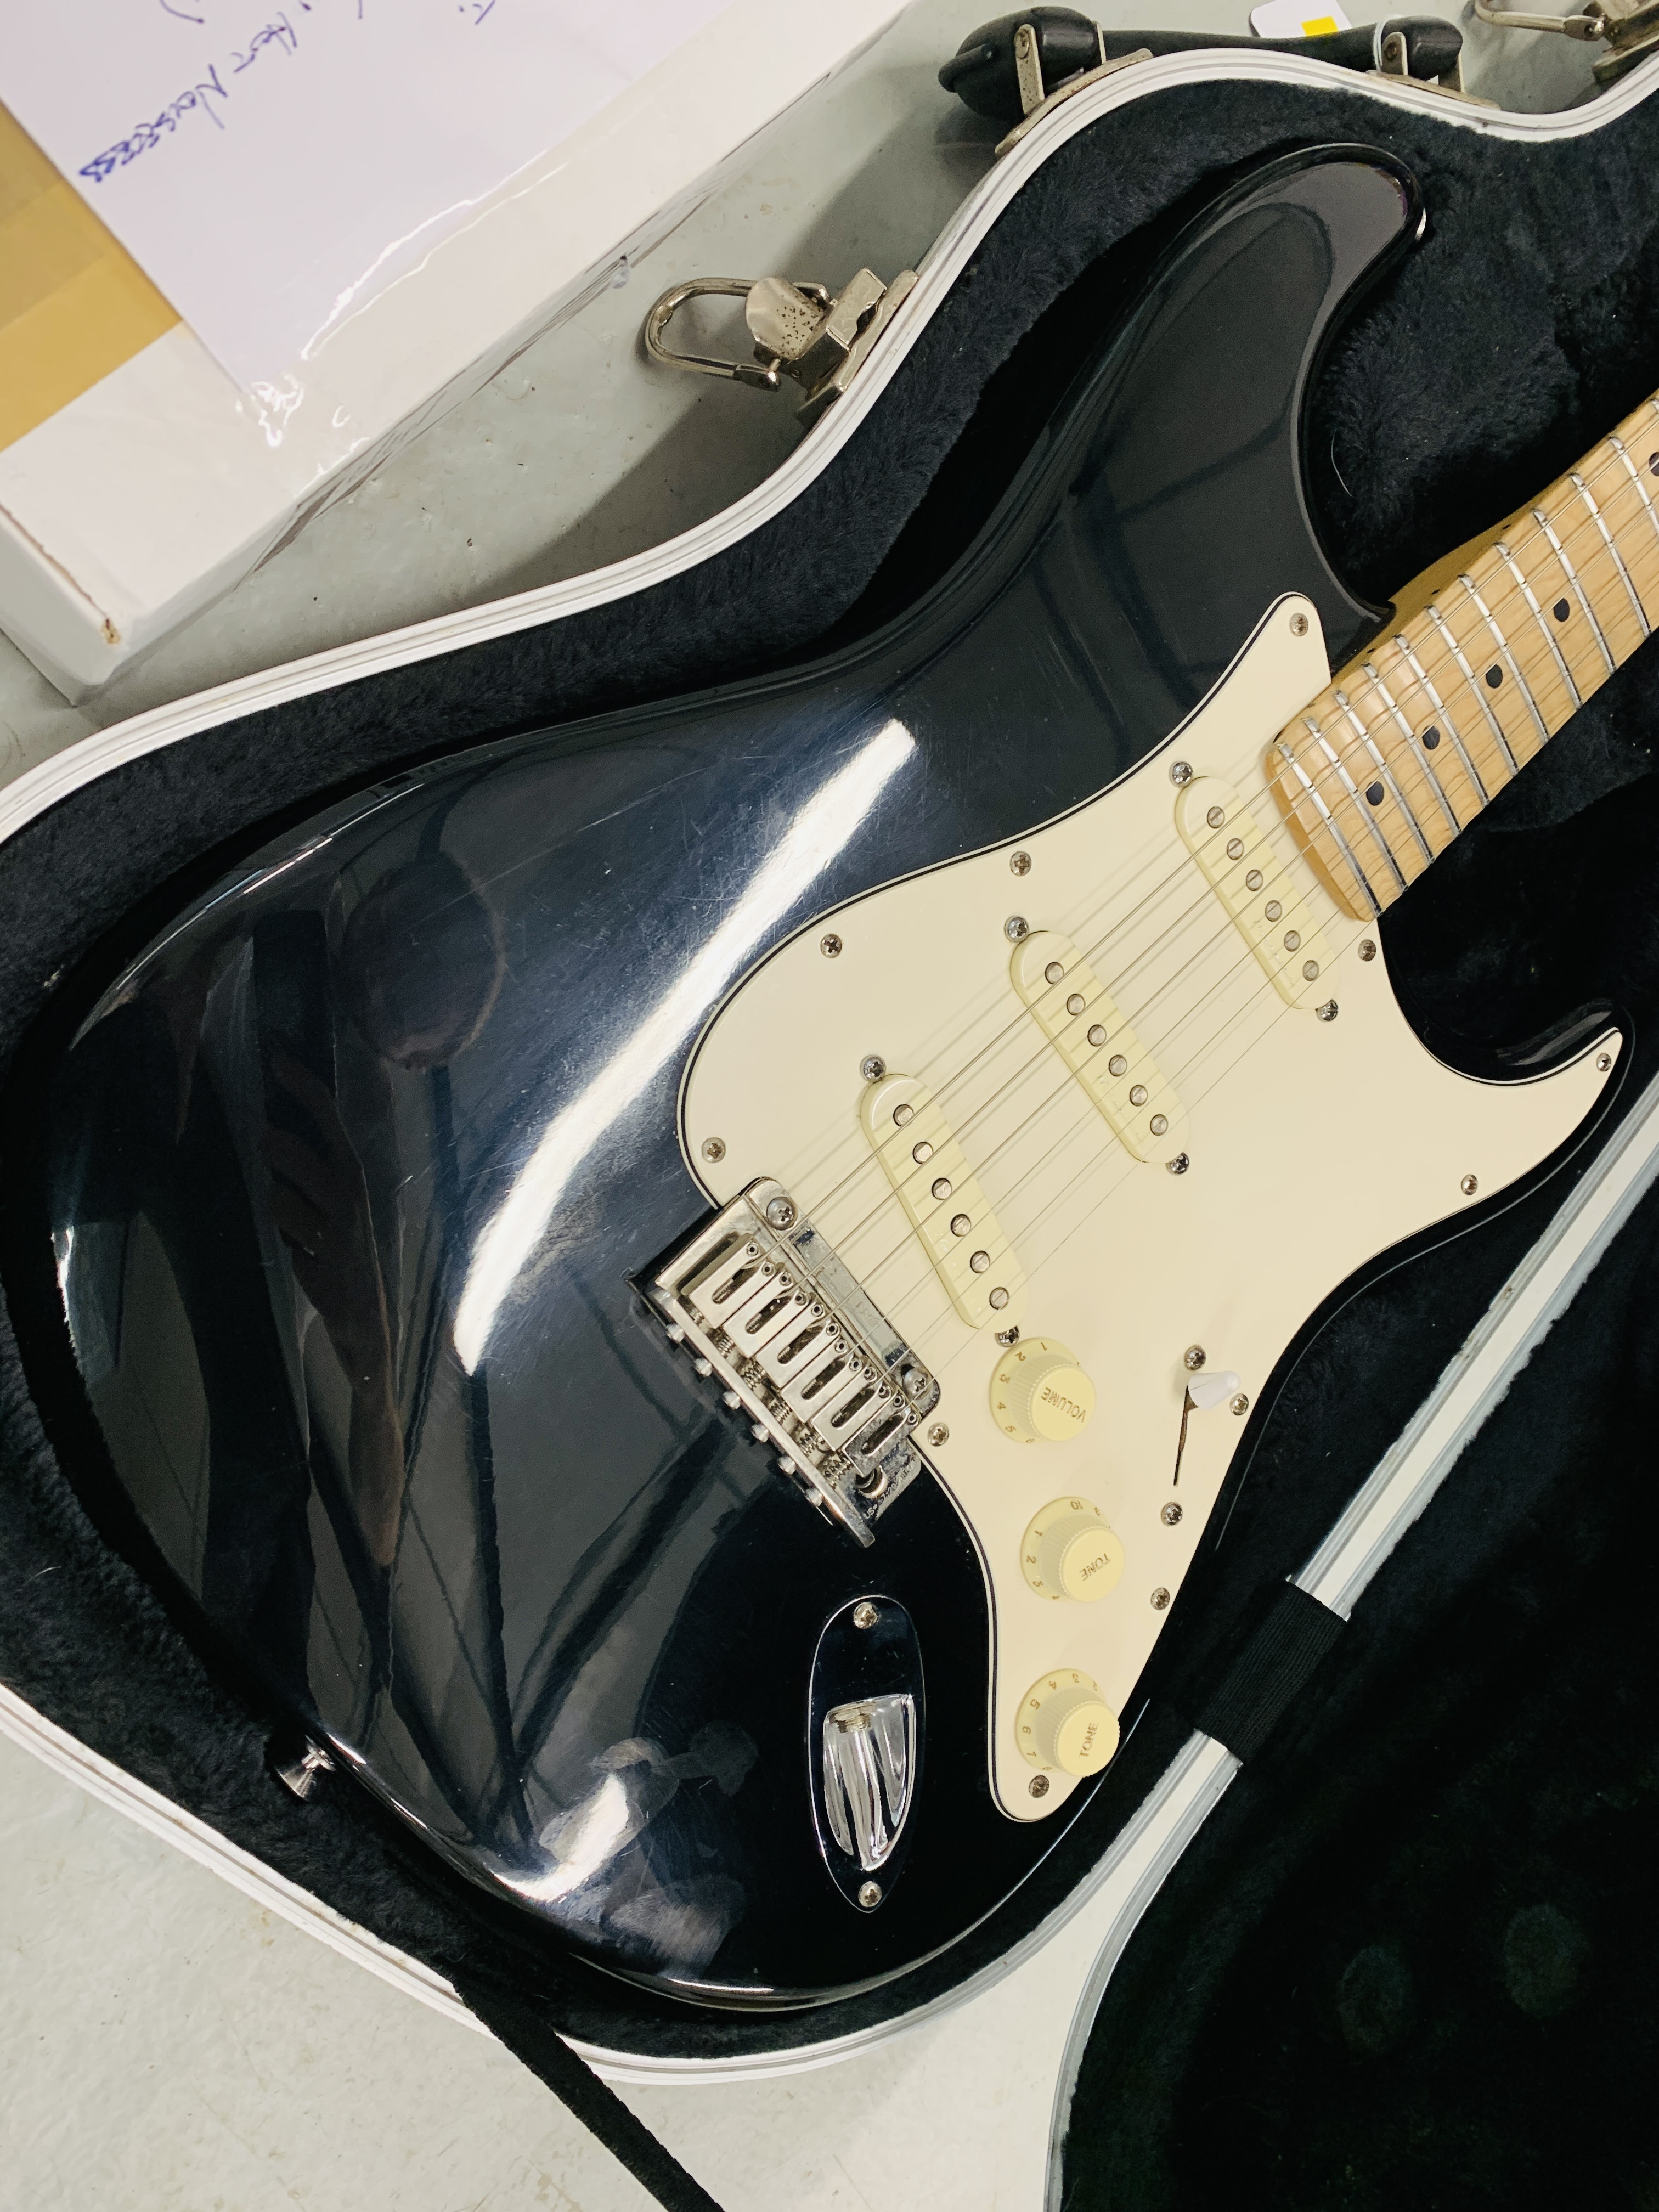 1 X UPGRADED USA FENDER STRATOCASTER GUITAR. - Image 2 of 10